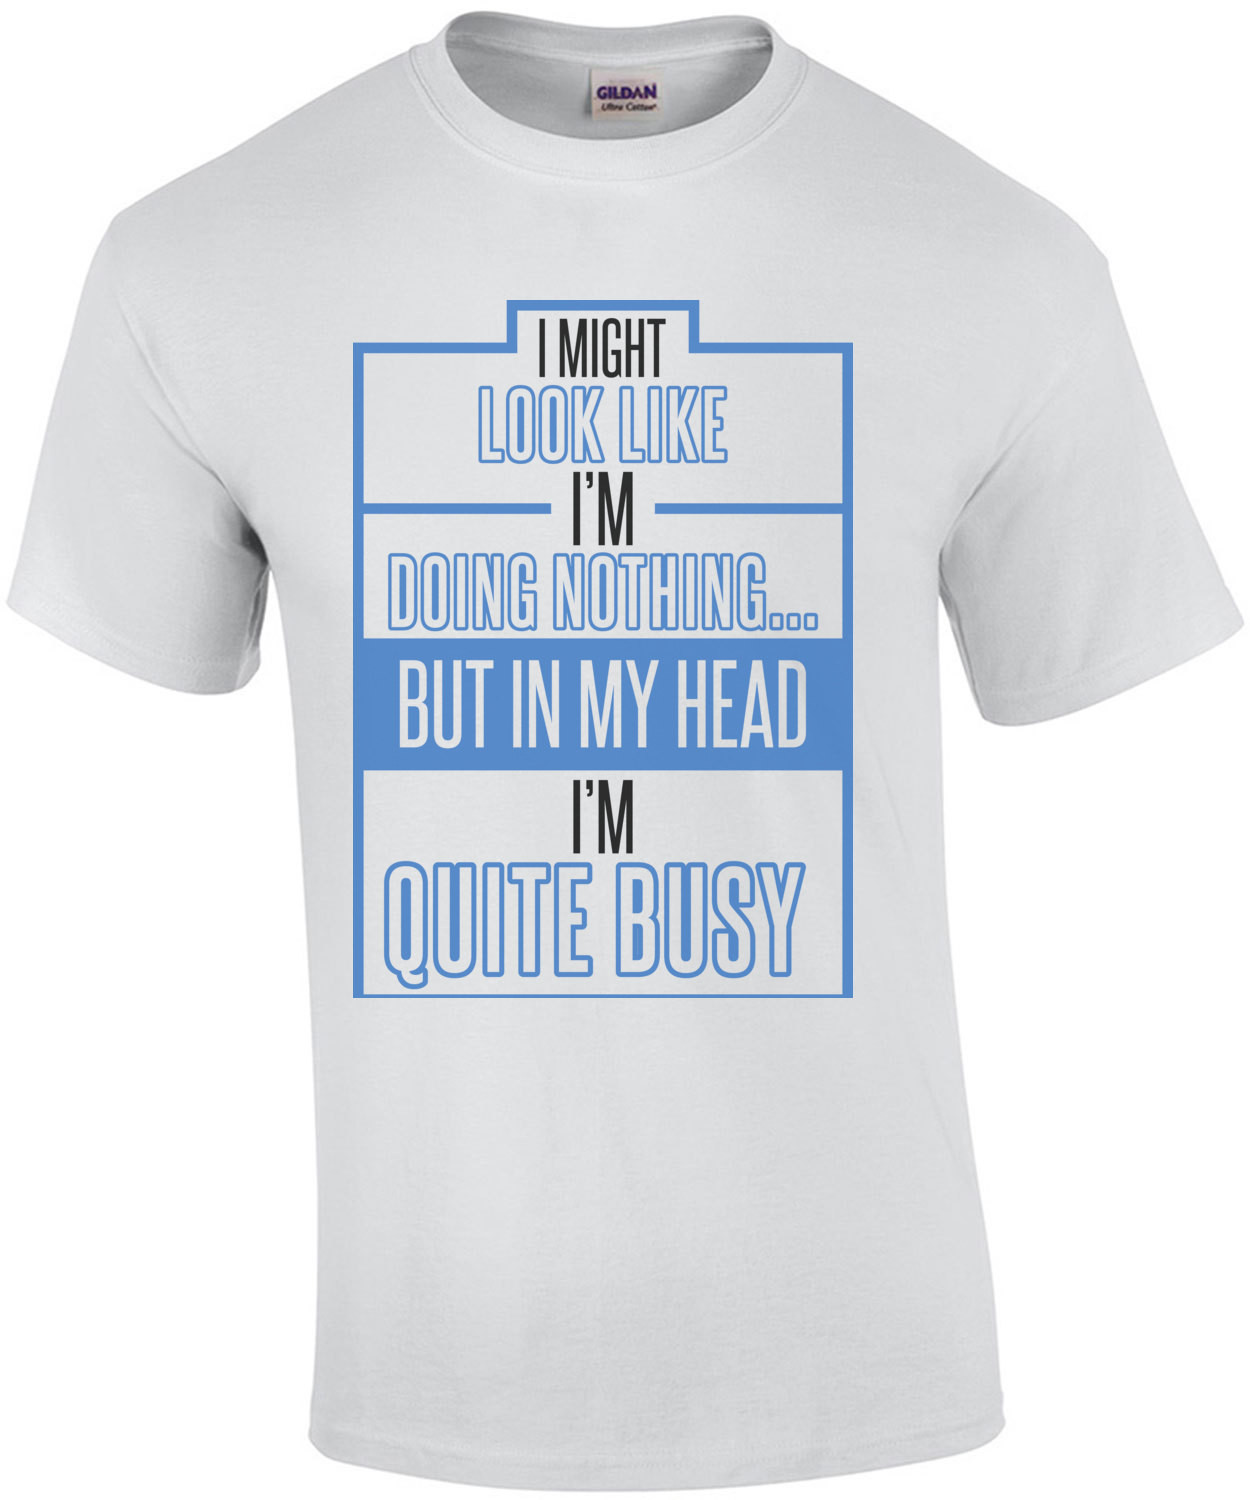 I Might Look Like I'm Doing Nothing But In My Head I'm Quite Busy T-Shirt